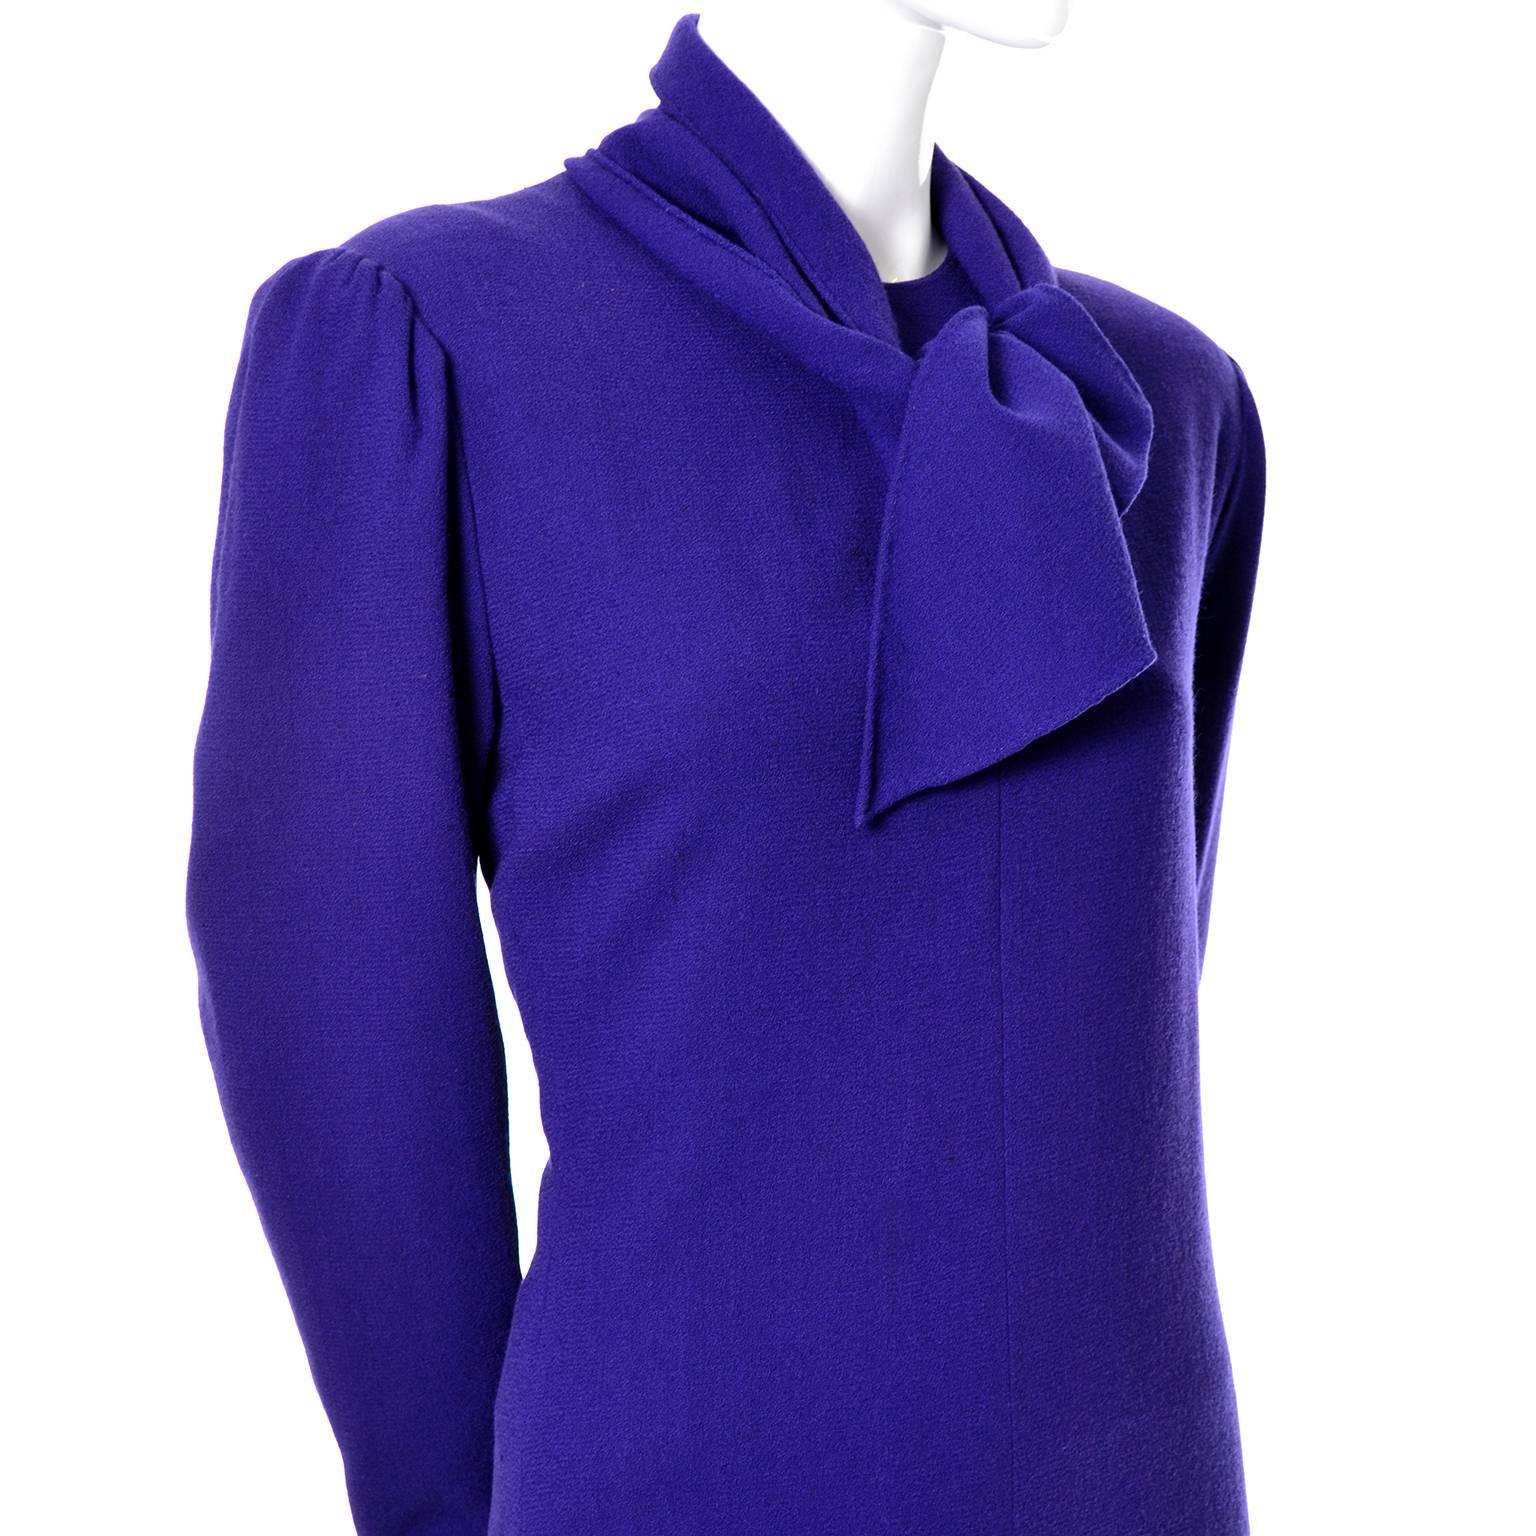 This timeless Pauline Trigere deep purple fine wool vintage dress has a sewn in sash at the neck and Trigere's trademark zippers on the sleeves.  The dress is fully lined, has shoulder pads, and closes with a back zipper.  This great, versatile